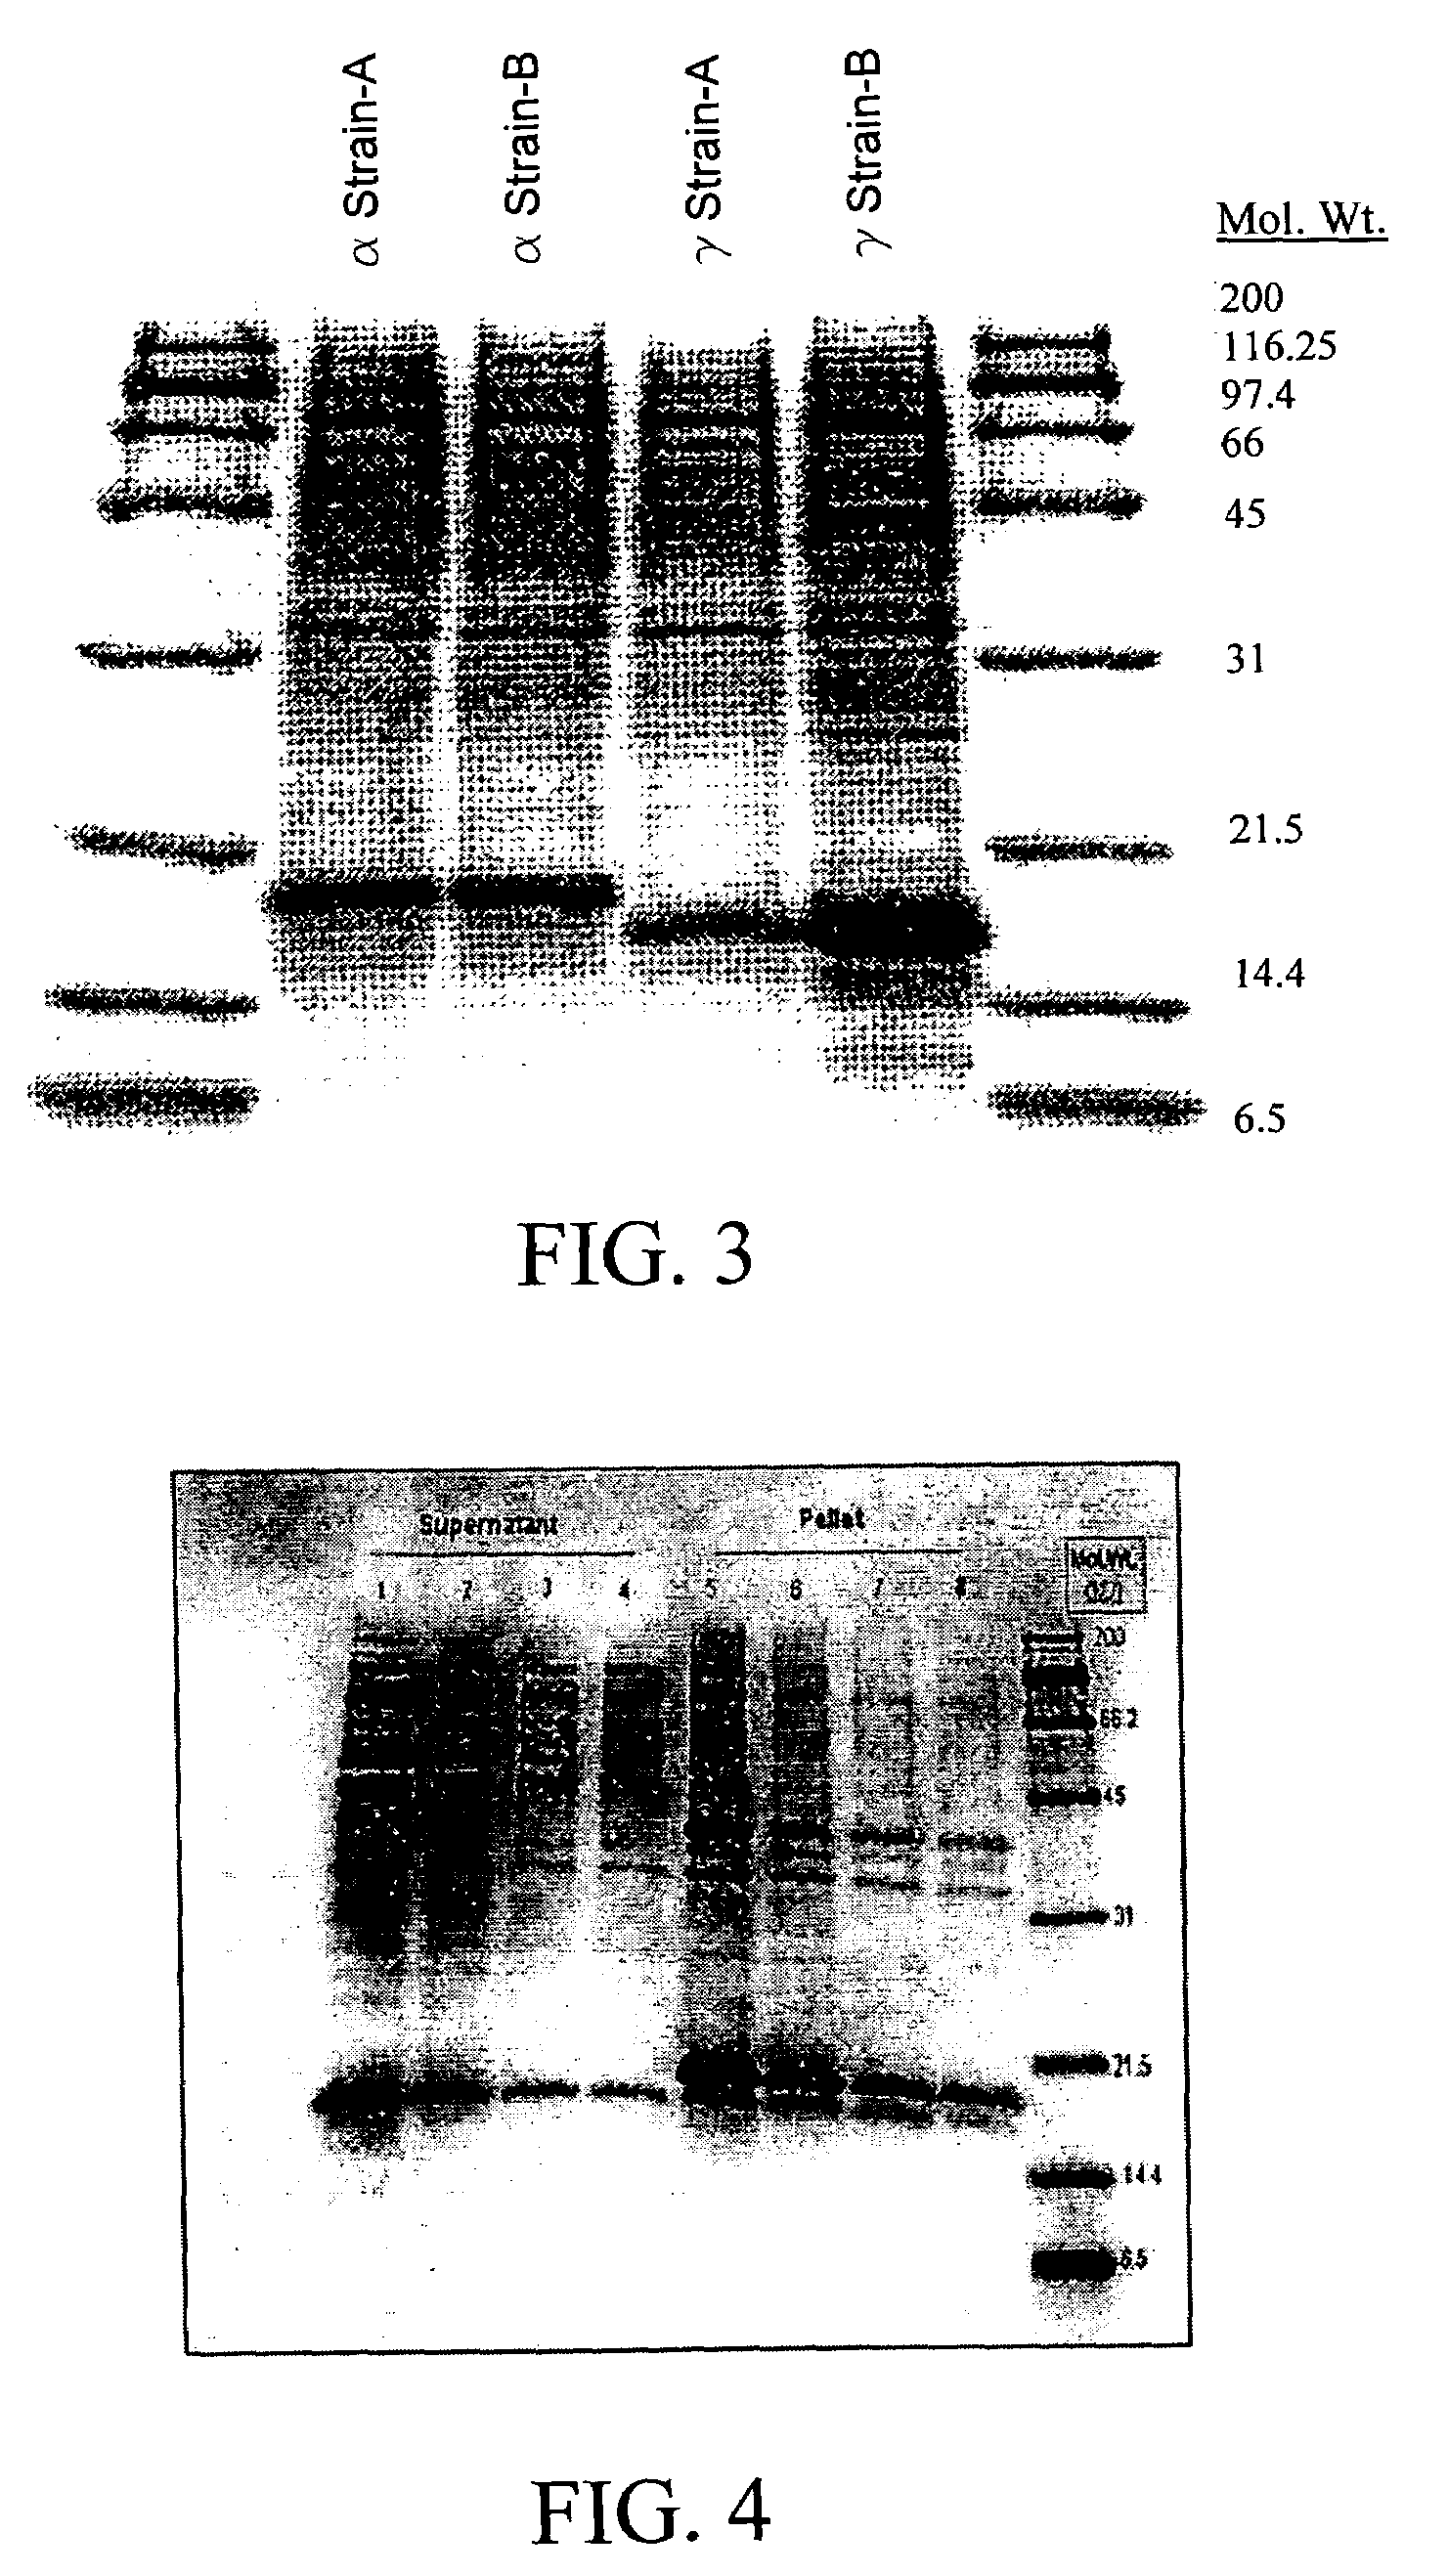 Amended recombinant cells for the production and delivery of gamma interferon as an antiviral agent, adjuvant and vaccine accelerant